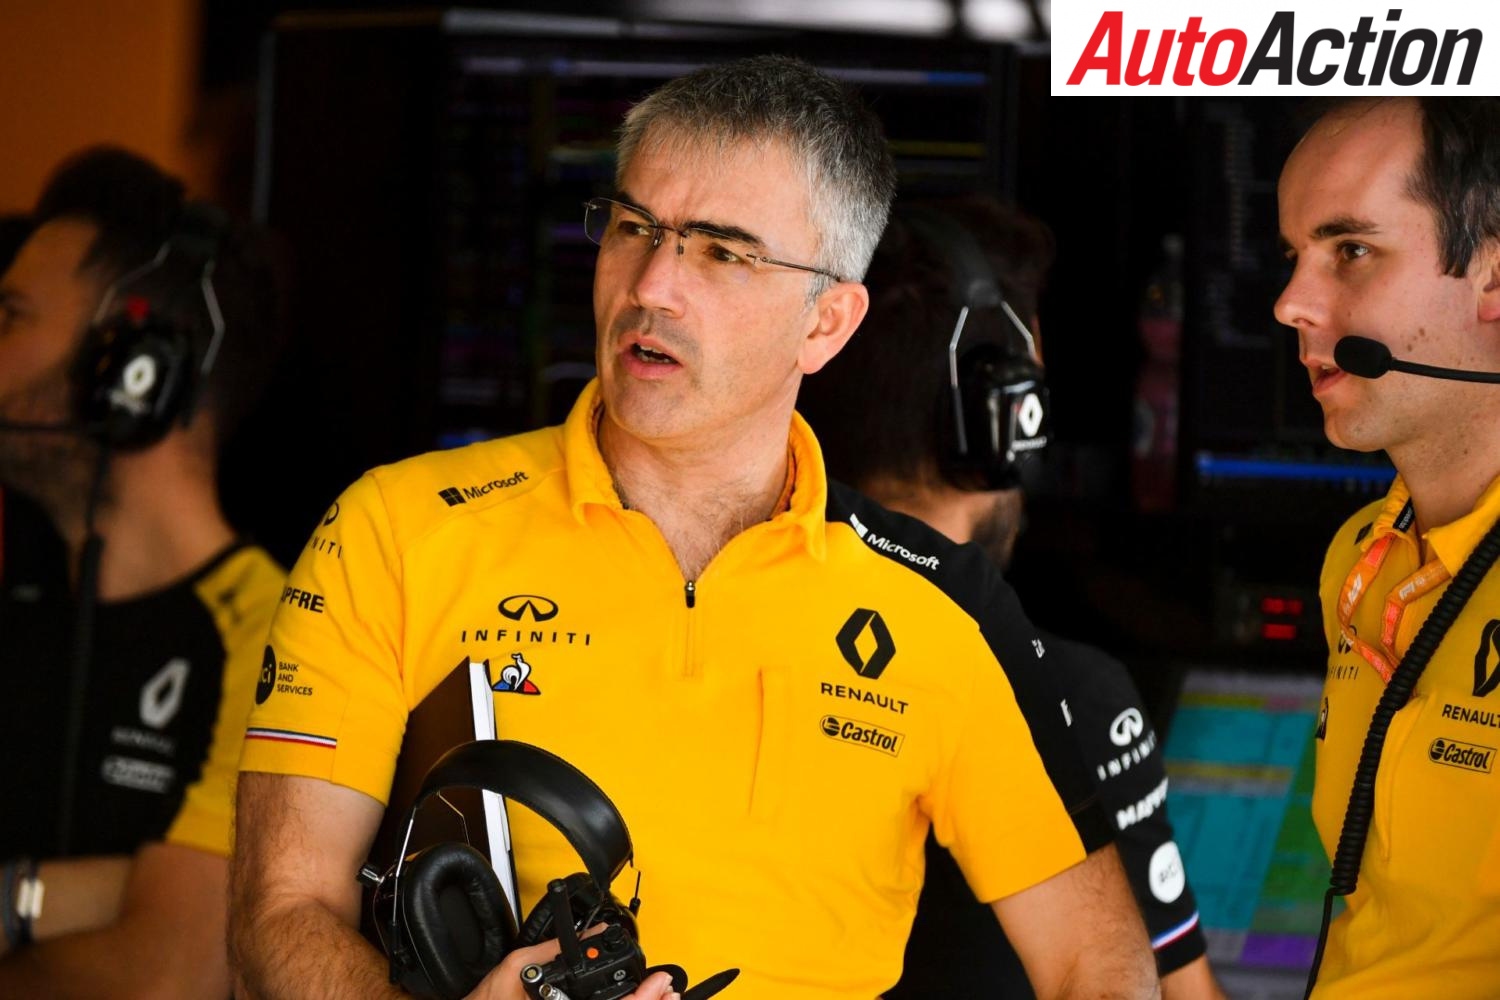 Major changes at Renault - PhotoL Suttons Images